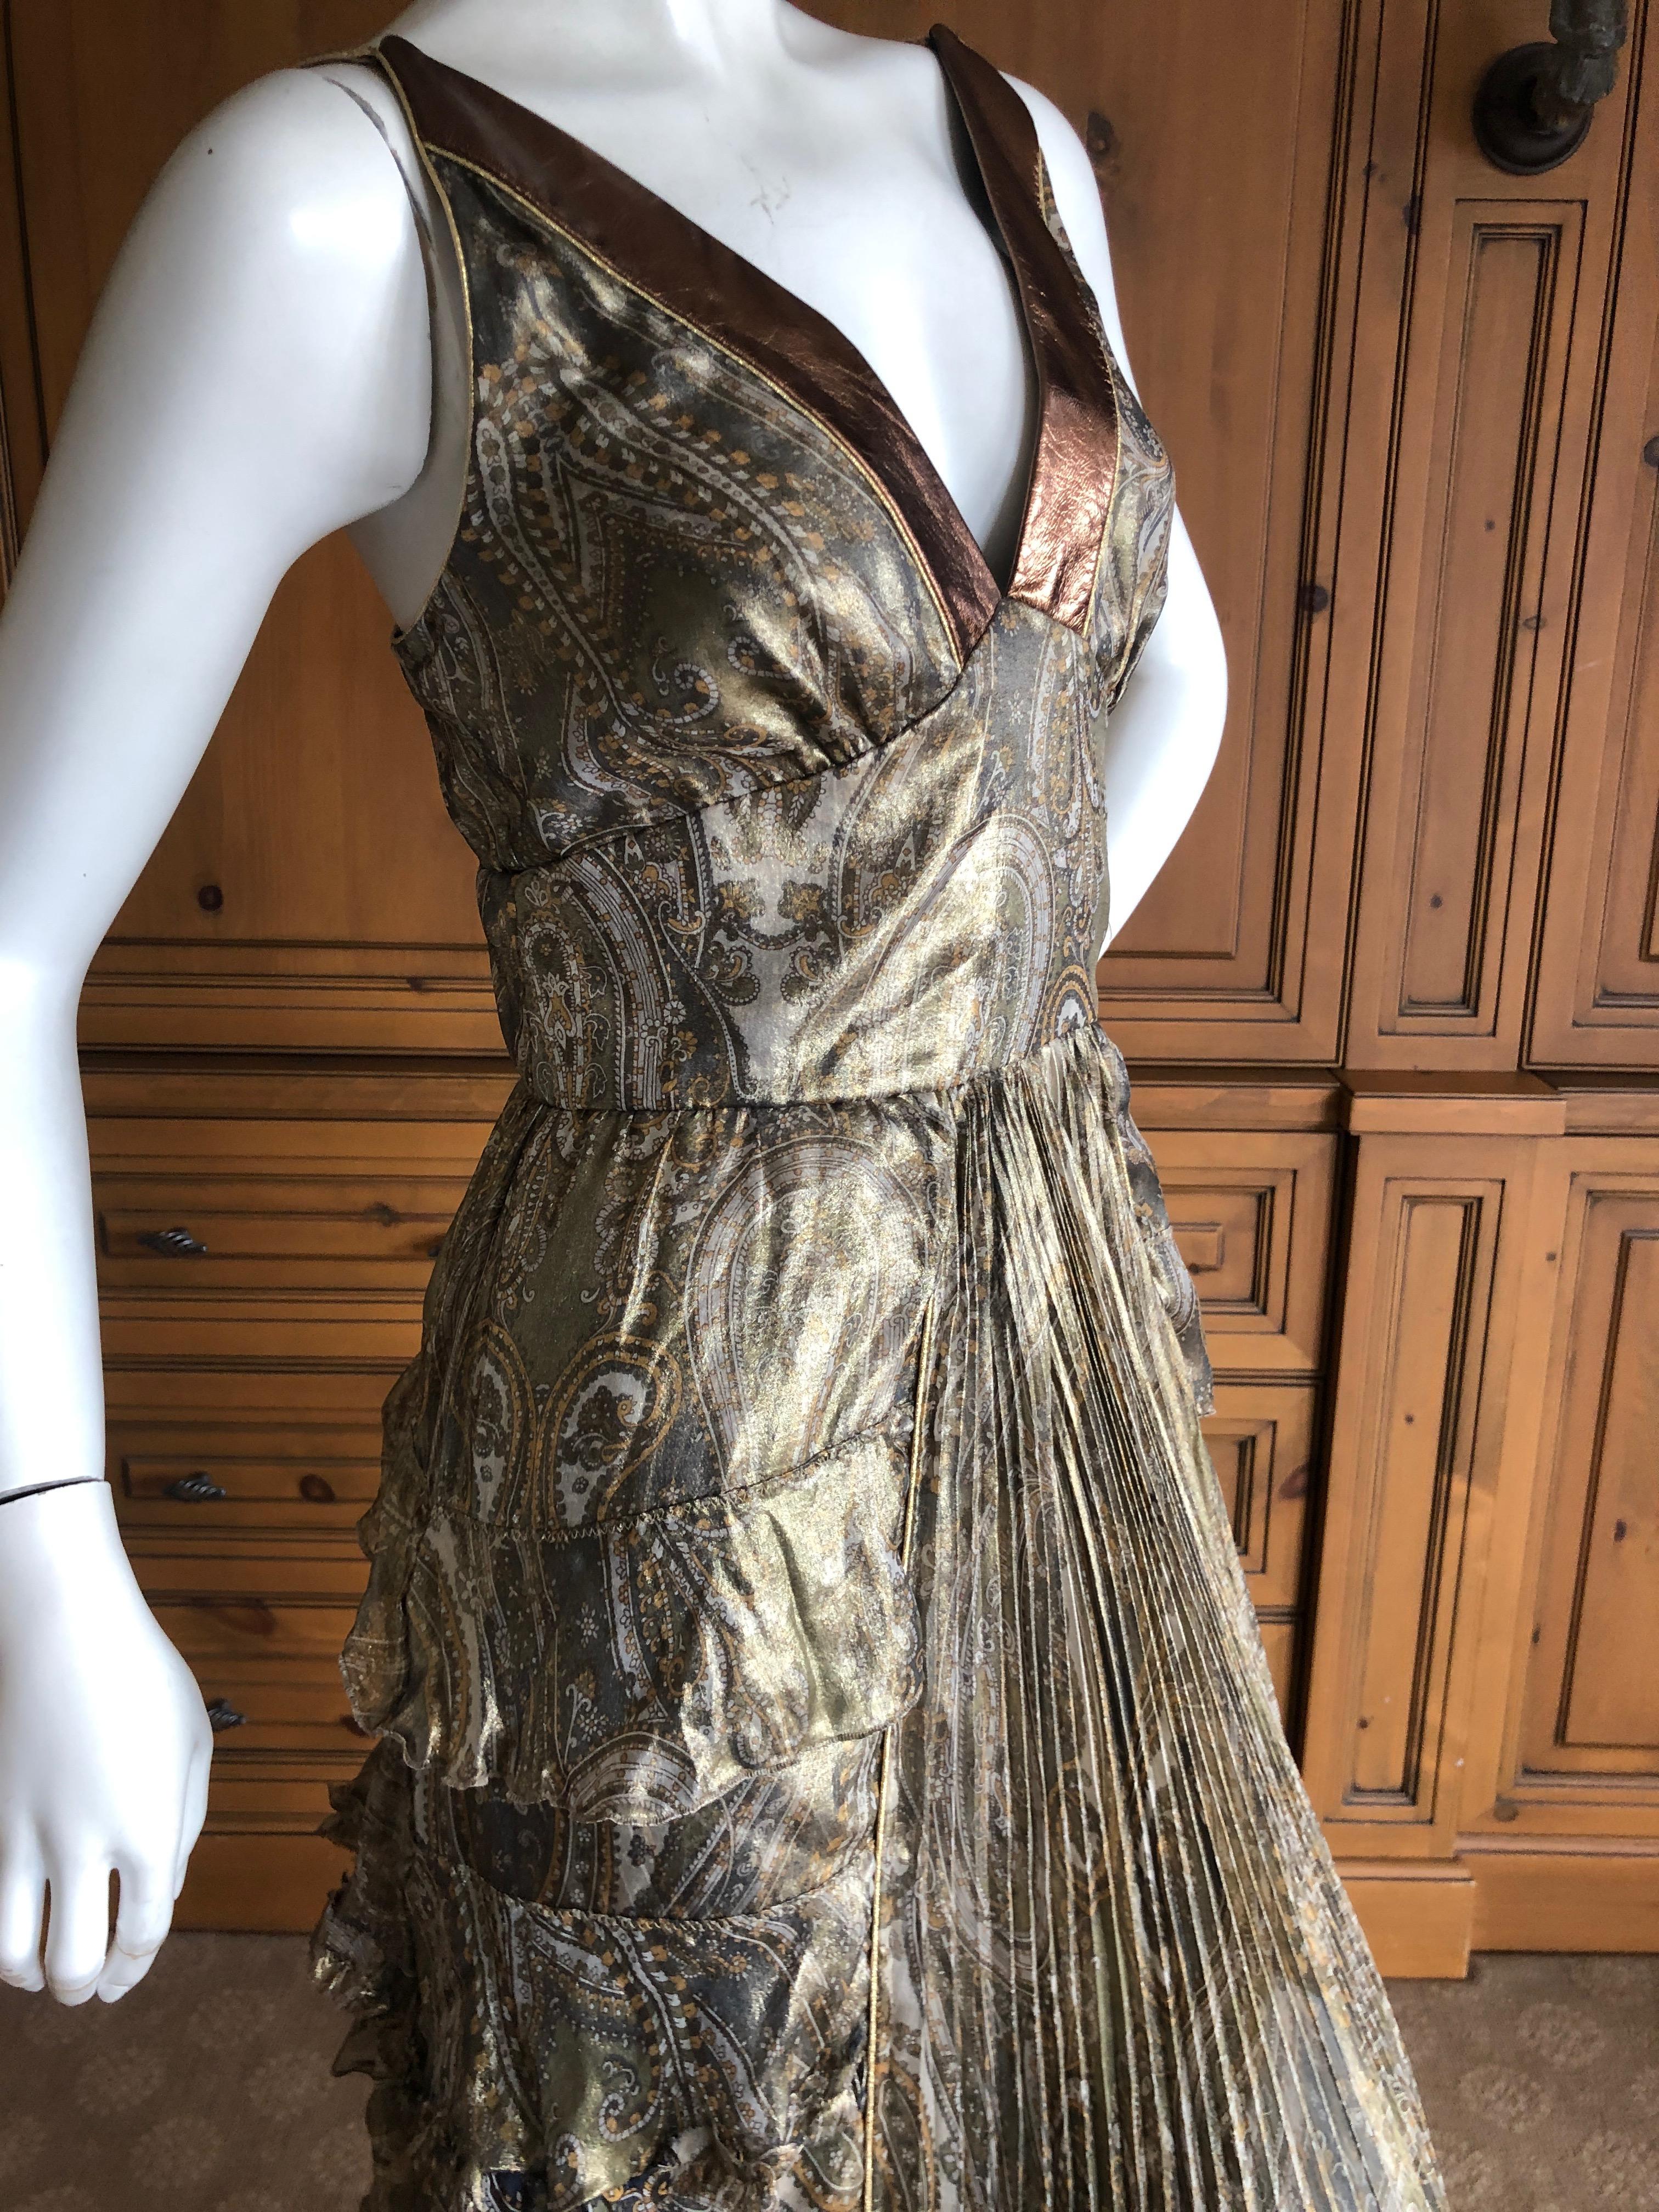 Dolce & Gabbana for D&G Golden Silk Paisley Pleated and Ruffled Evening Dress
This is so pretty, it shines so beautifully.
Size 42
 Bust 38